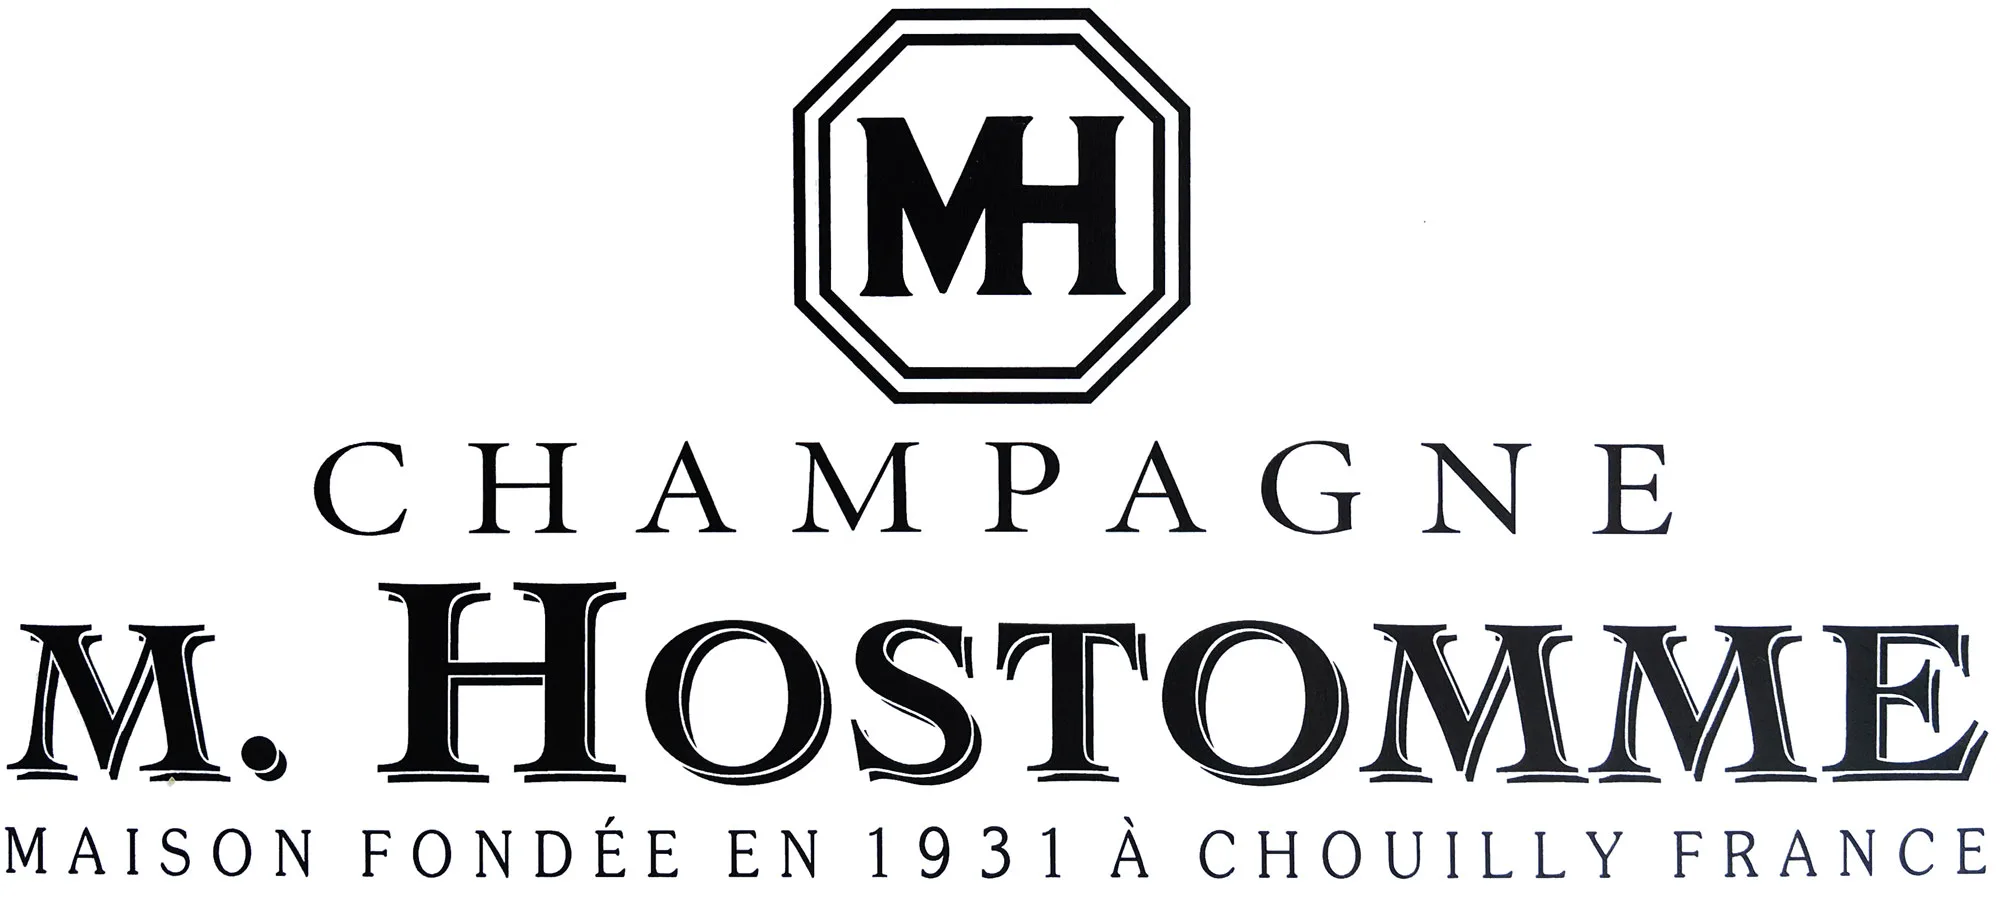 Champagne M. Hostomme